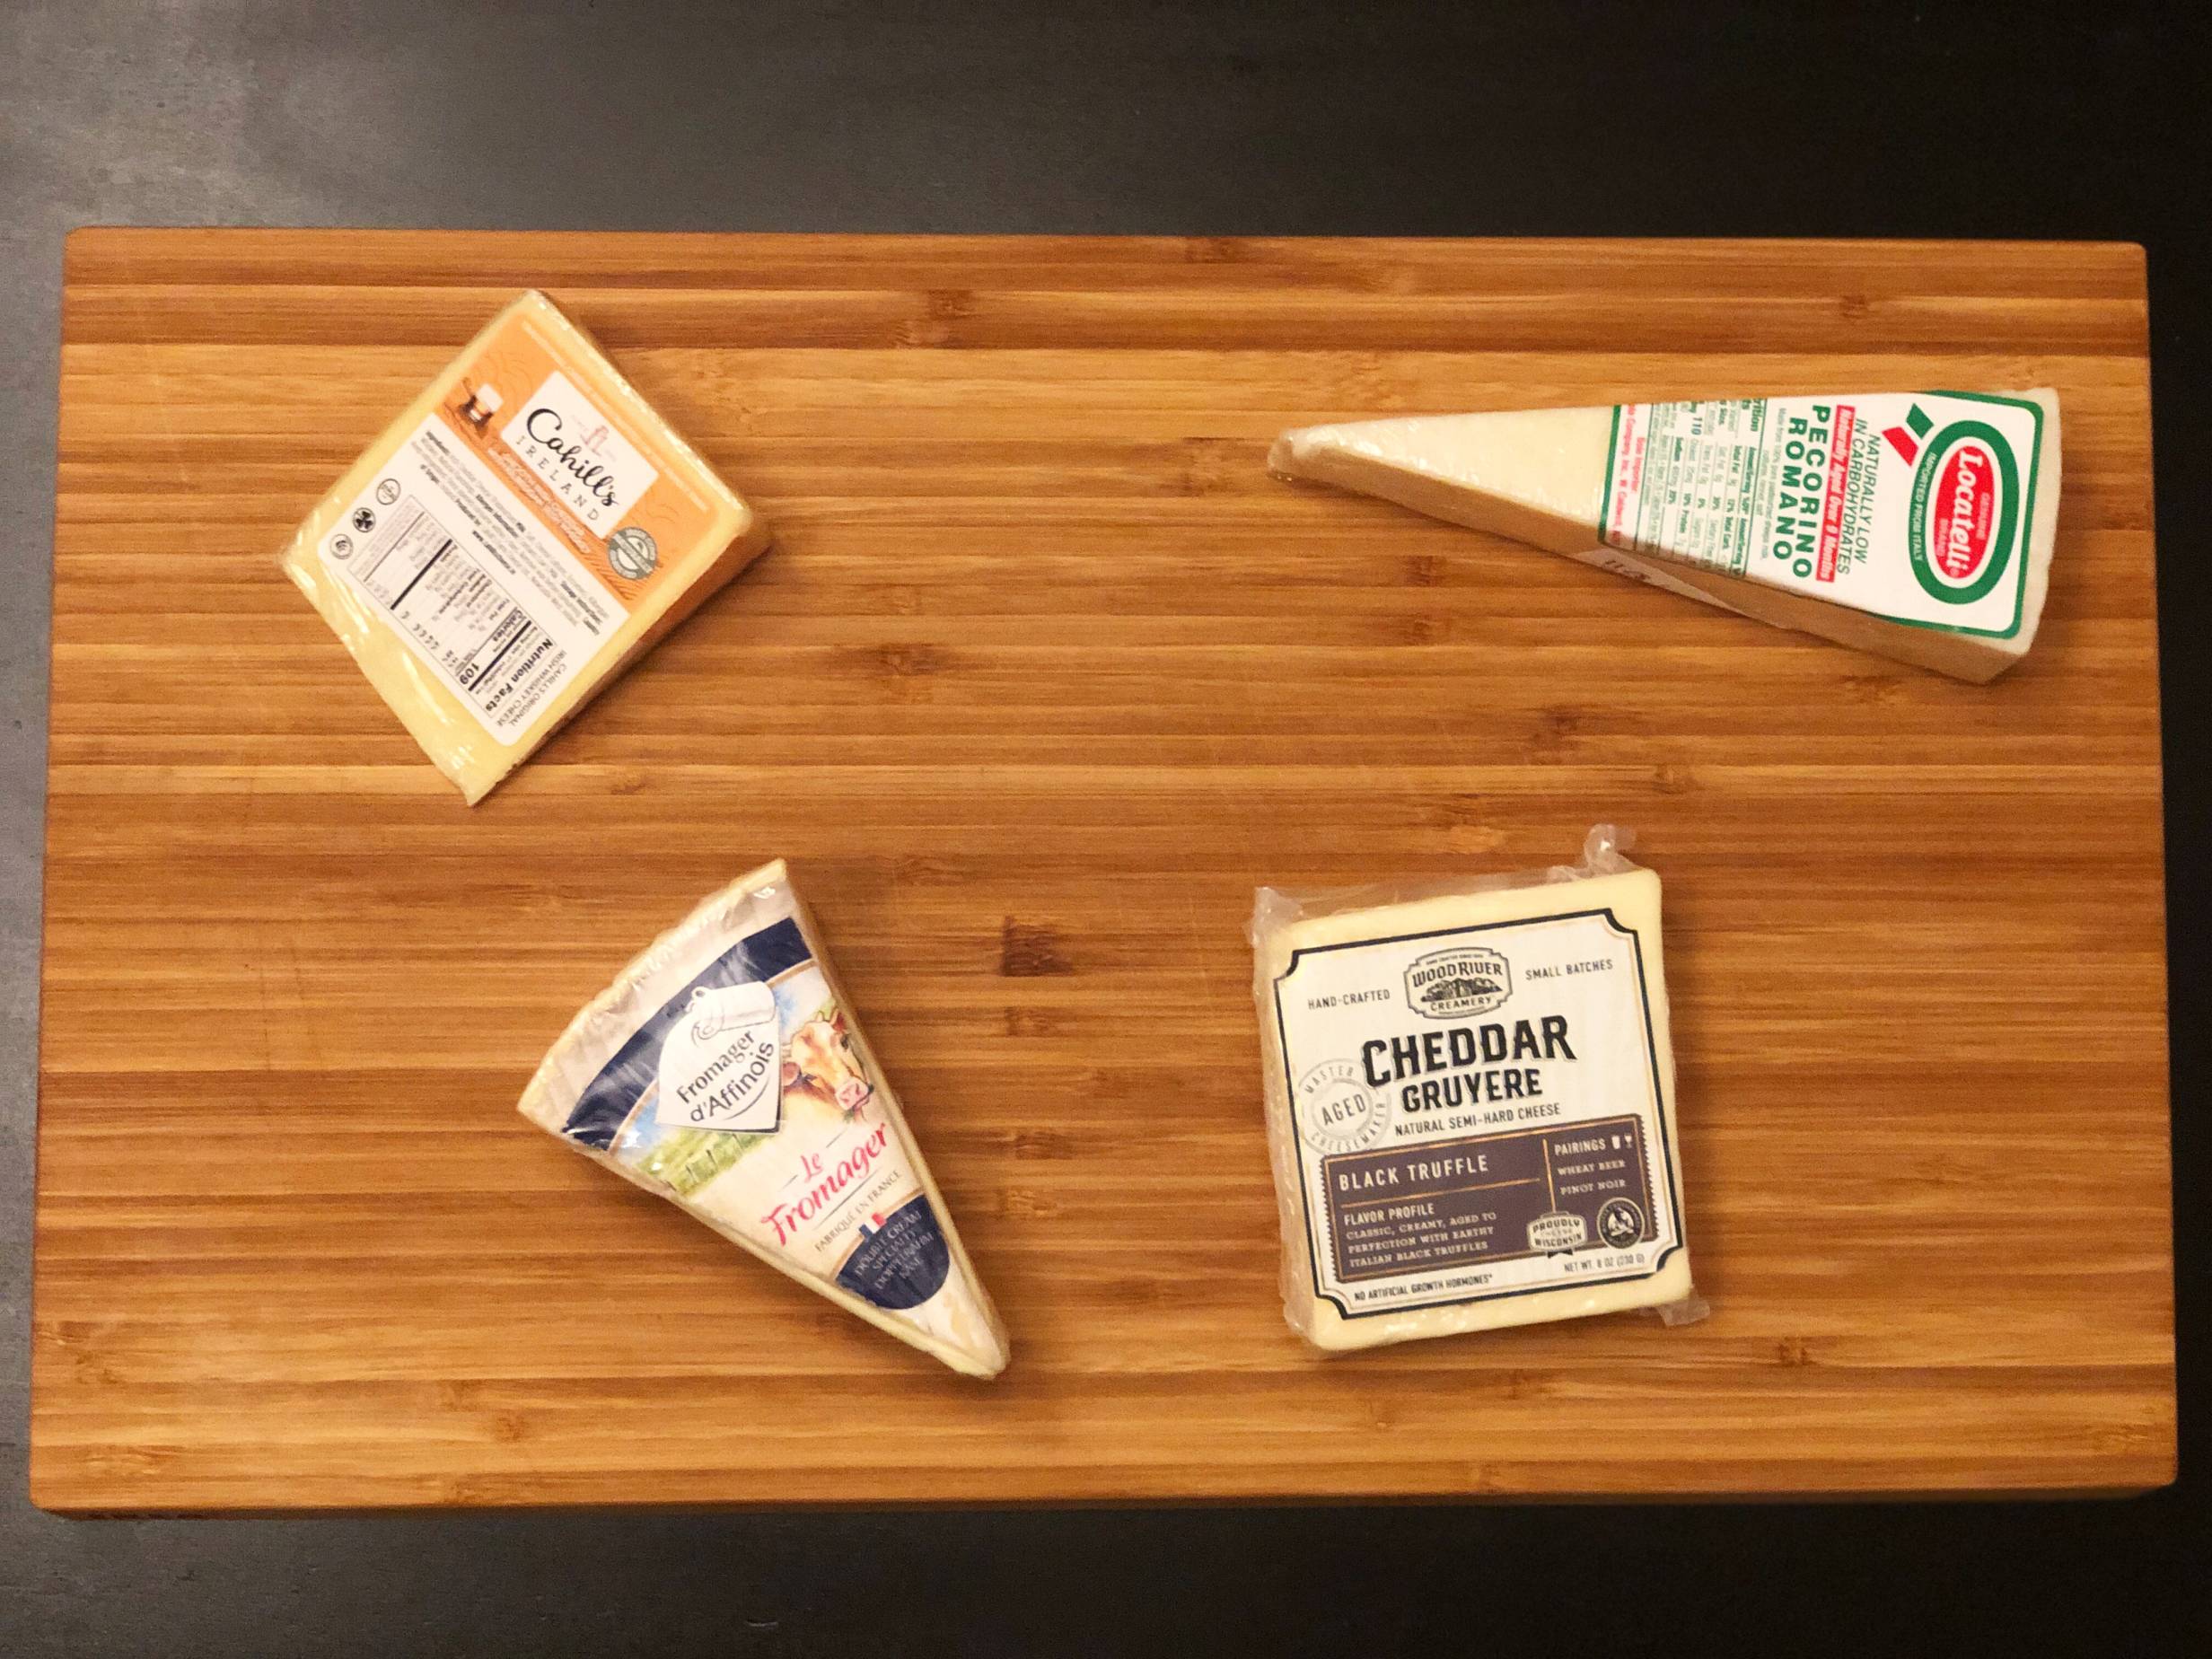 A wooden cutting board with four cheeses. The top left is a square of Cahill, top right is a skinny triangle of Pecorino. Bottom left is a wedge of Fromager dâ€™Affinois, and the bottom left is a square of Cheddar. All are in the plastic packaging with labels in view. Photo by Alyssa Buckley.